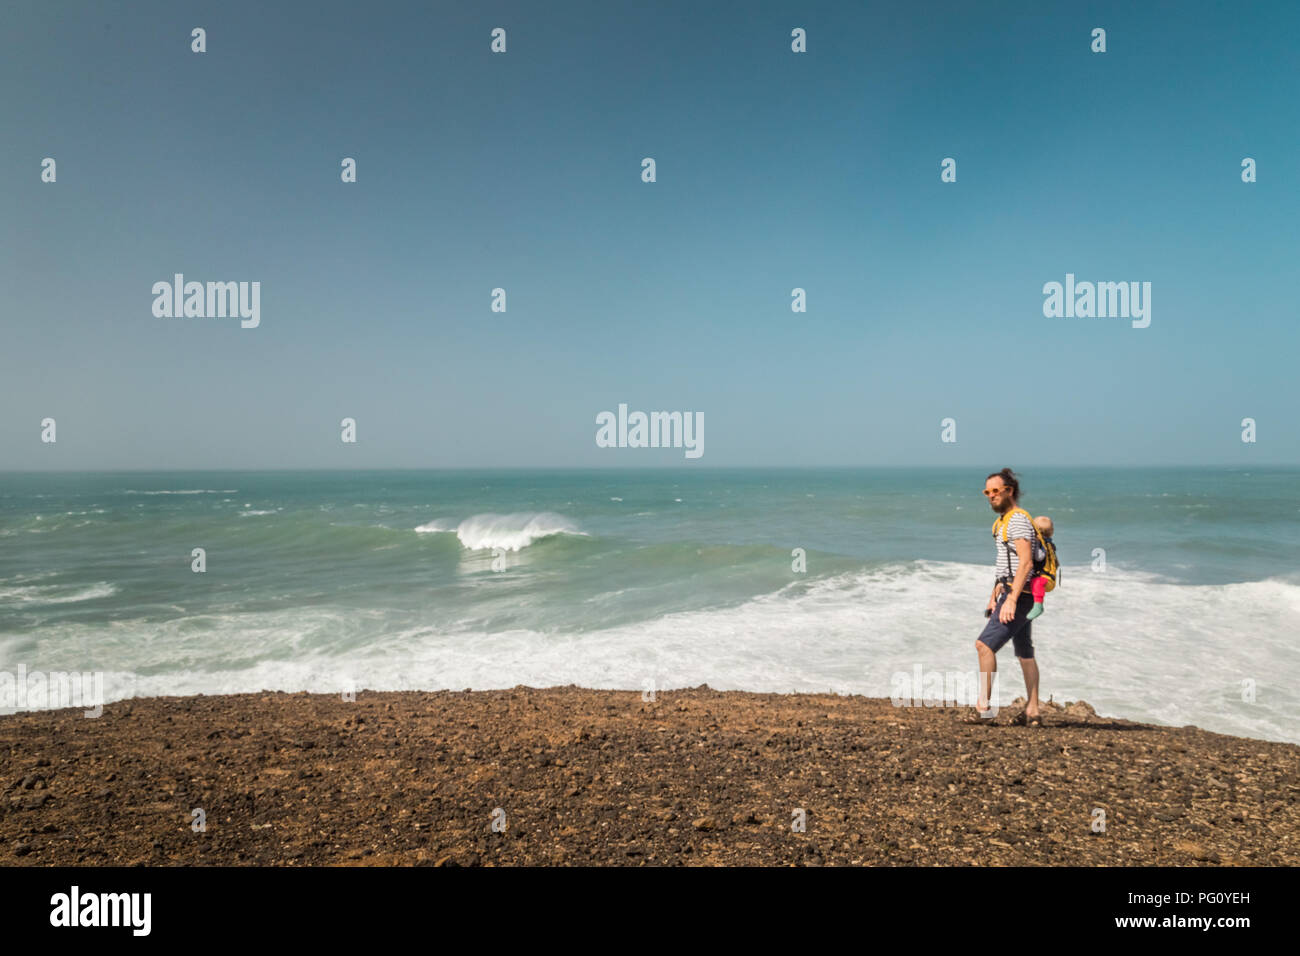 Man walking with baby on his back across the beach in Fuerteventura, Canary Islands, Spain. Stock Photo